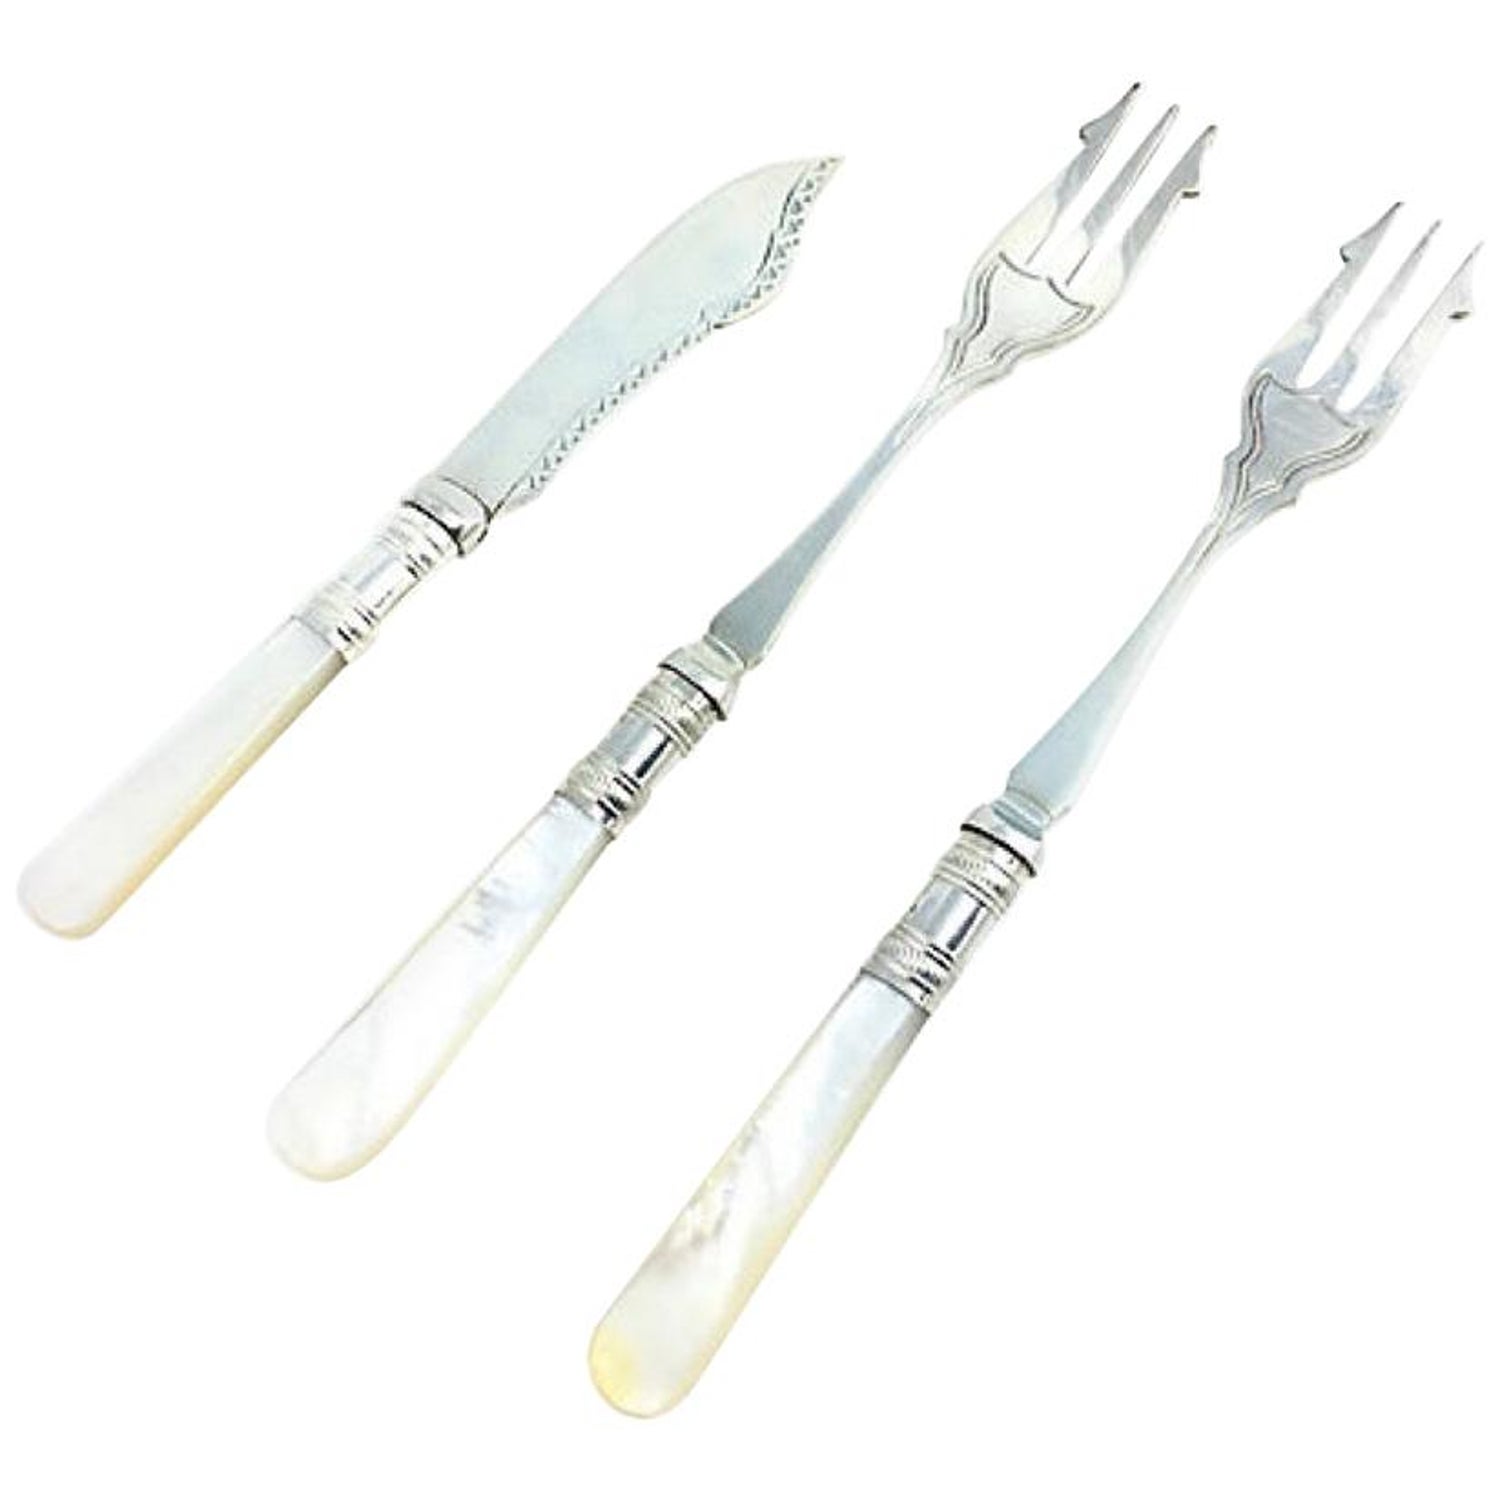 s 5 1/4" International Warwick Sterling Silver Oyster Seafood or Cocktail Fork